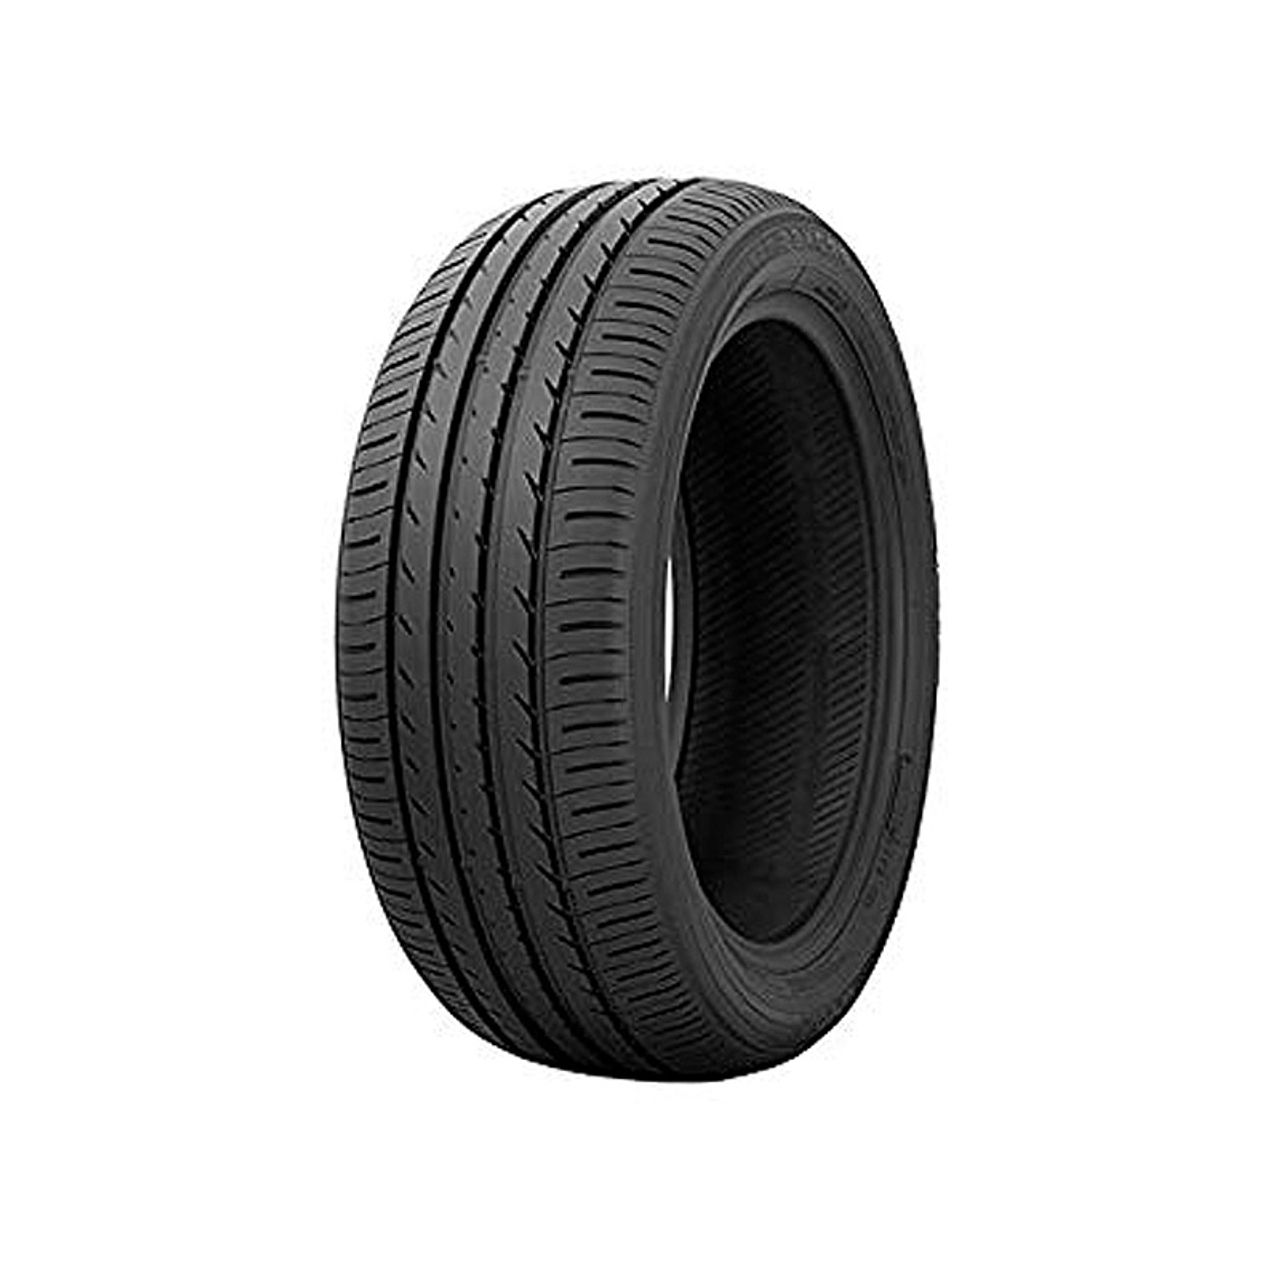 TOYO PROXES R52 215/50R18 92V BSW